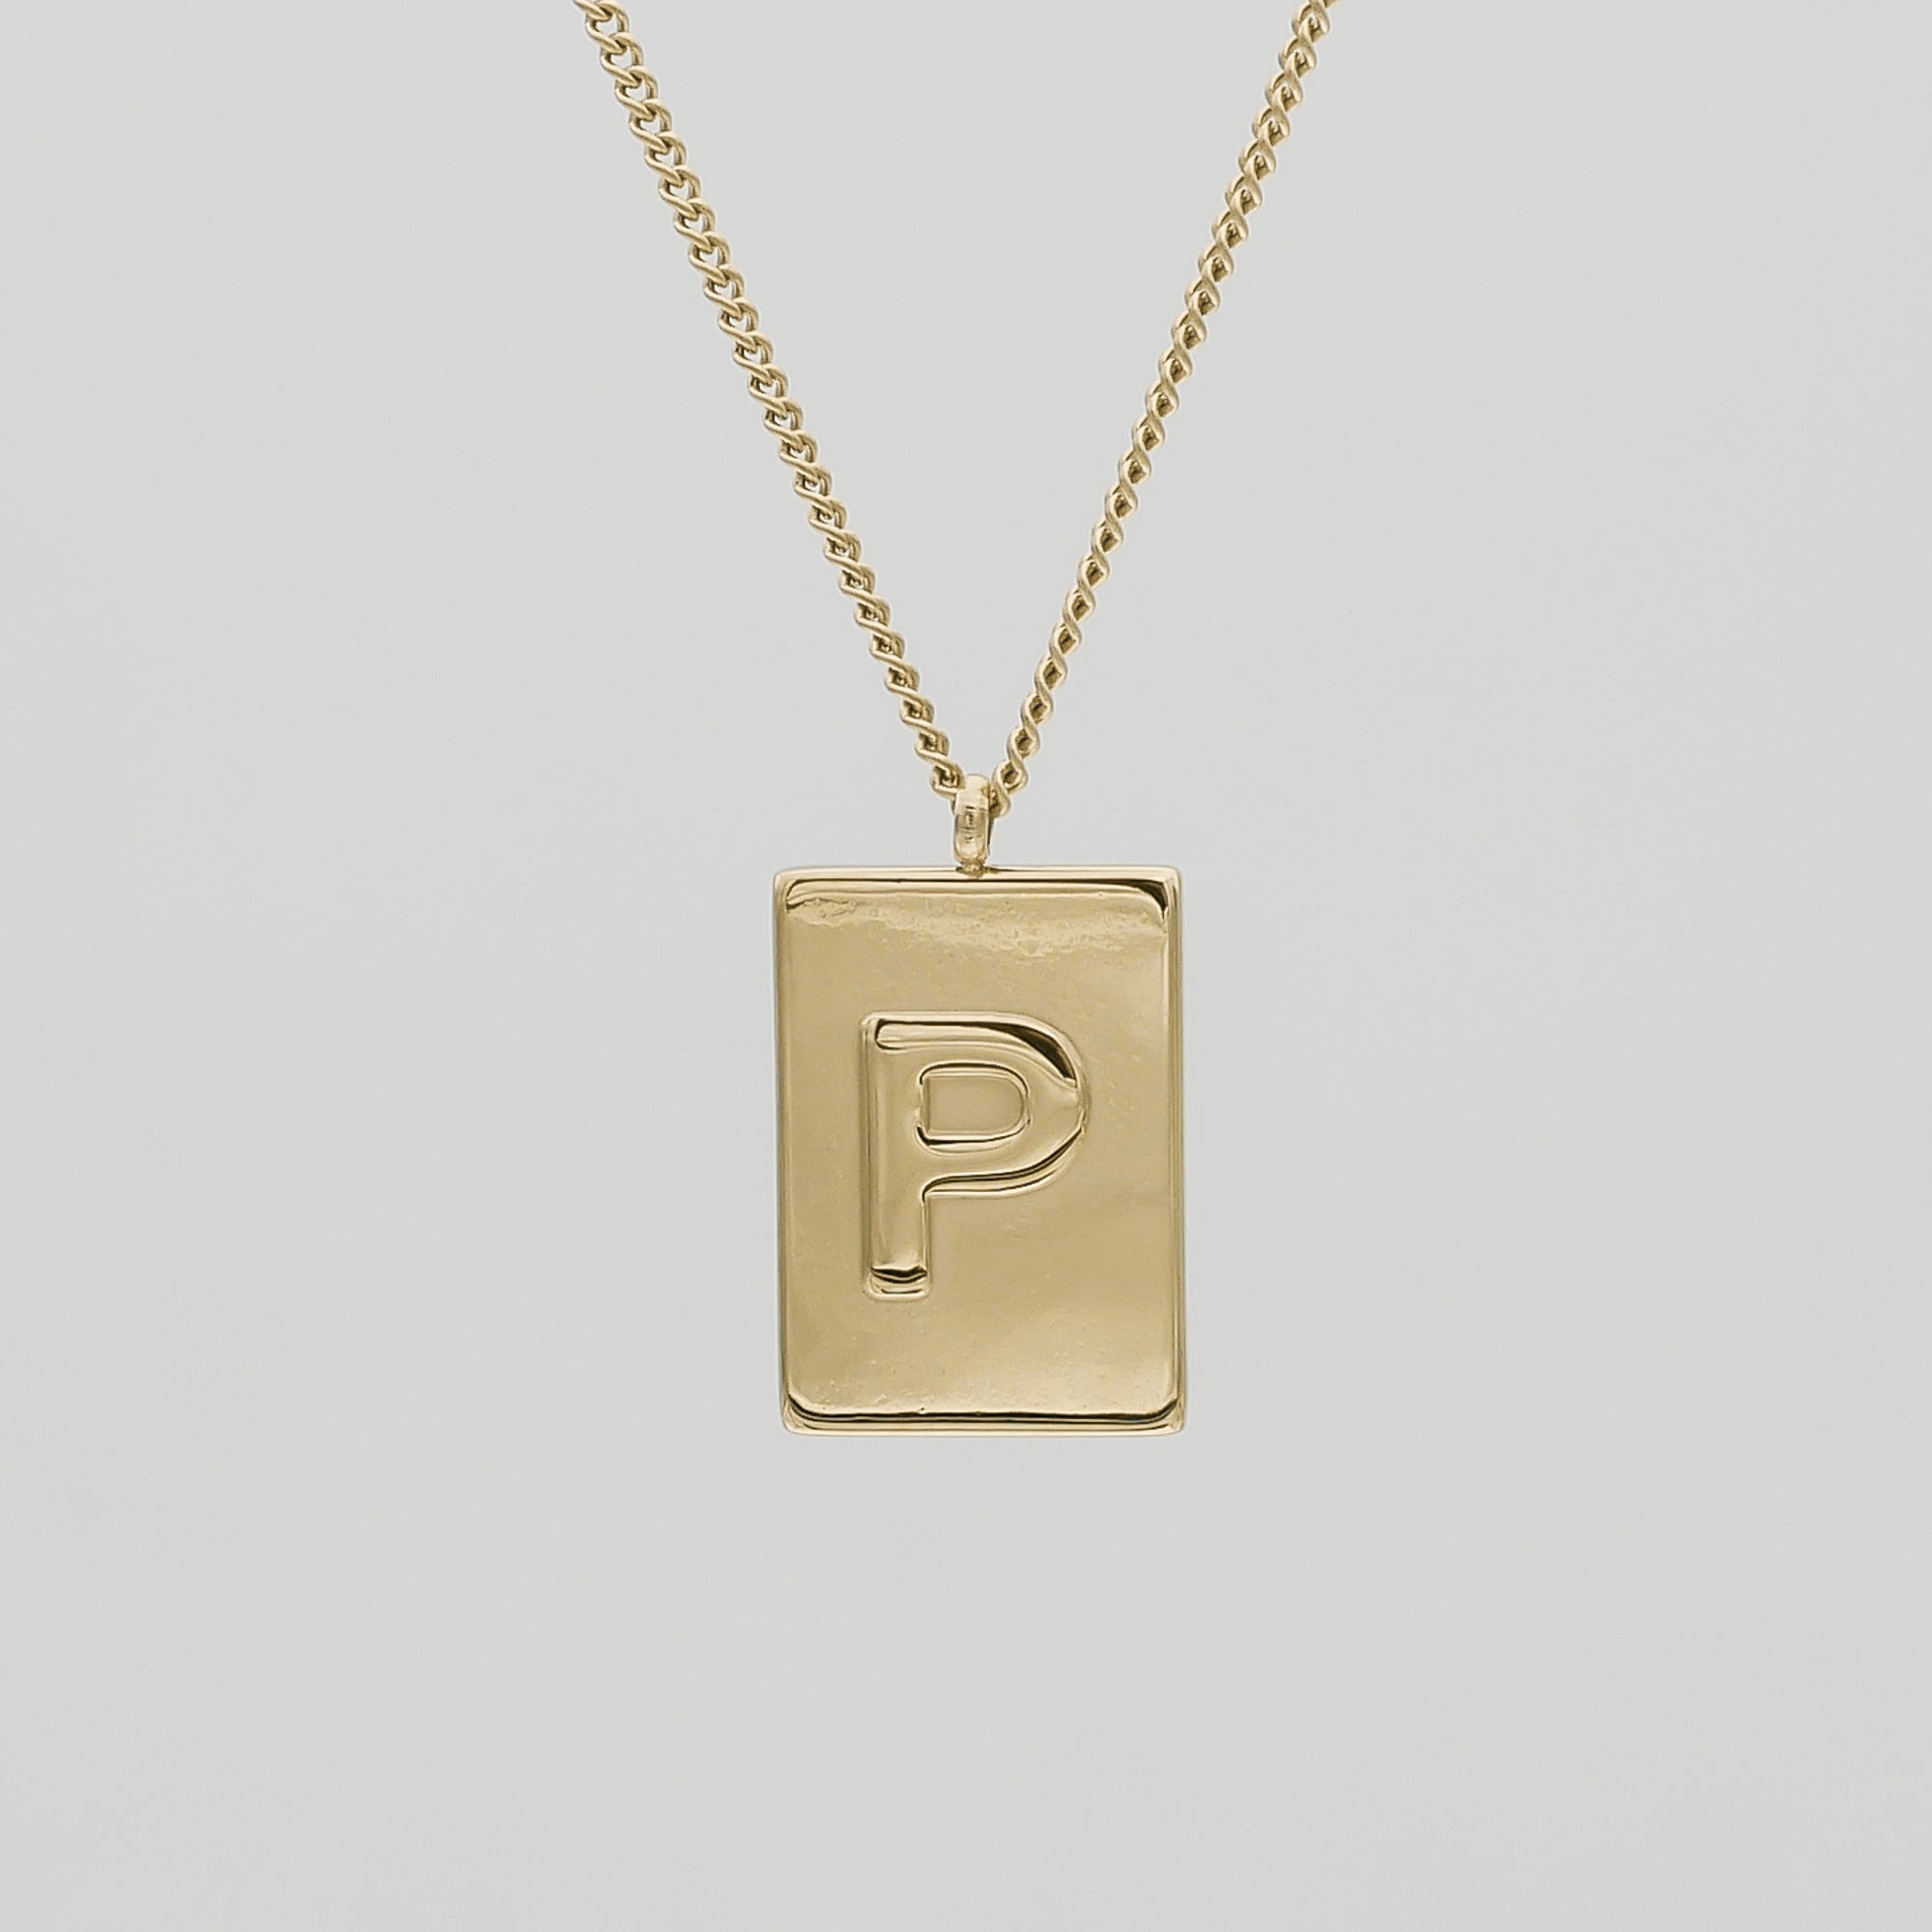 Athena custom initial Gold pendant Necklace, letter P by PRYA